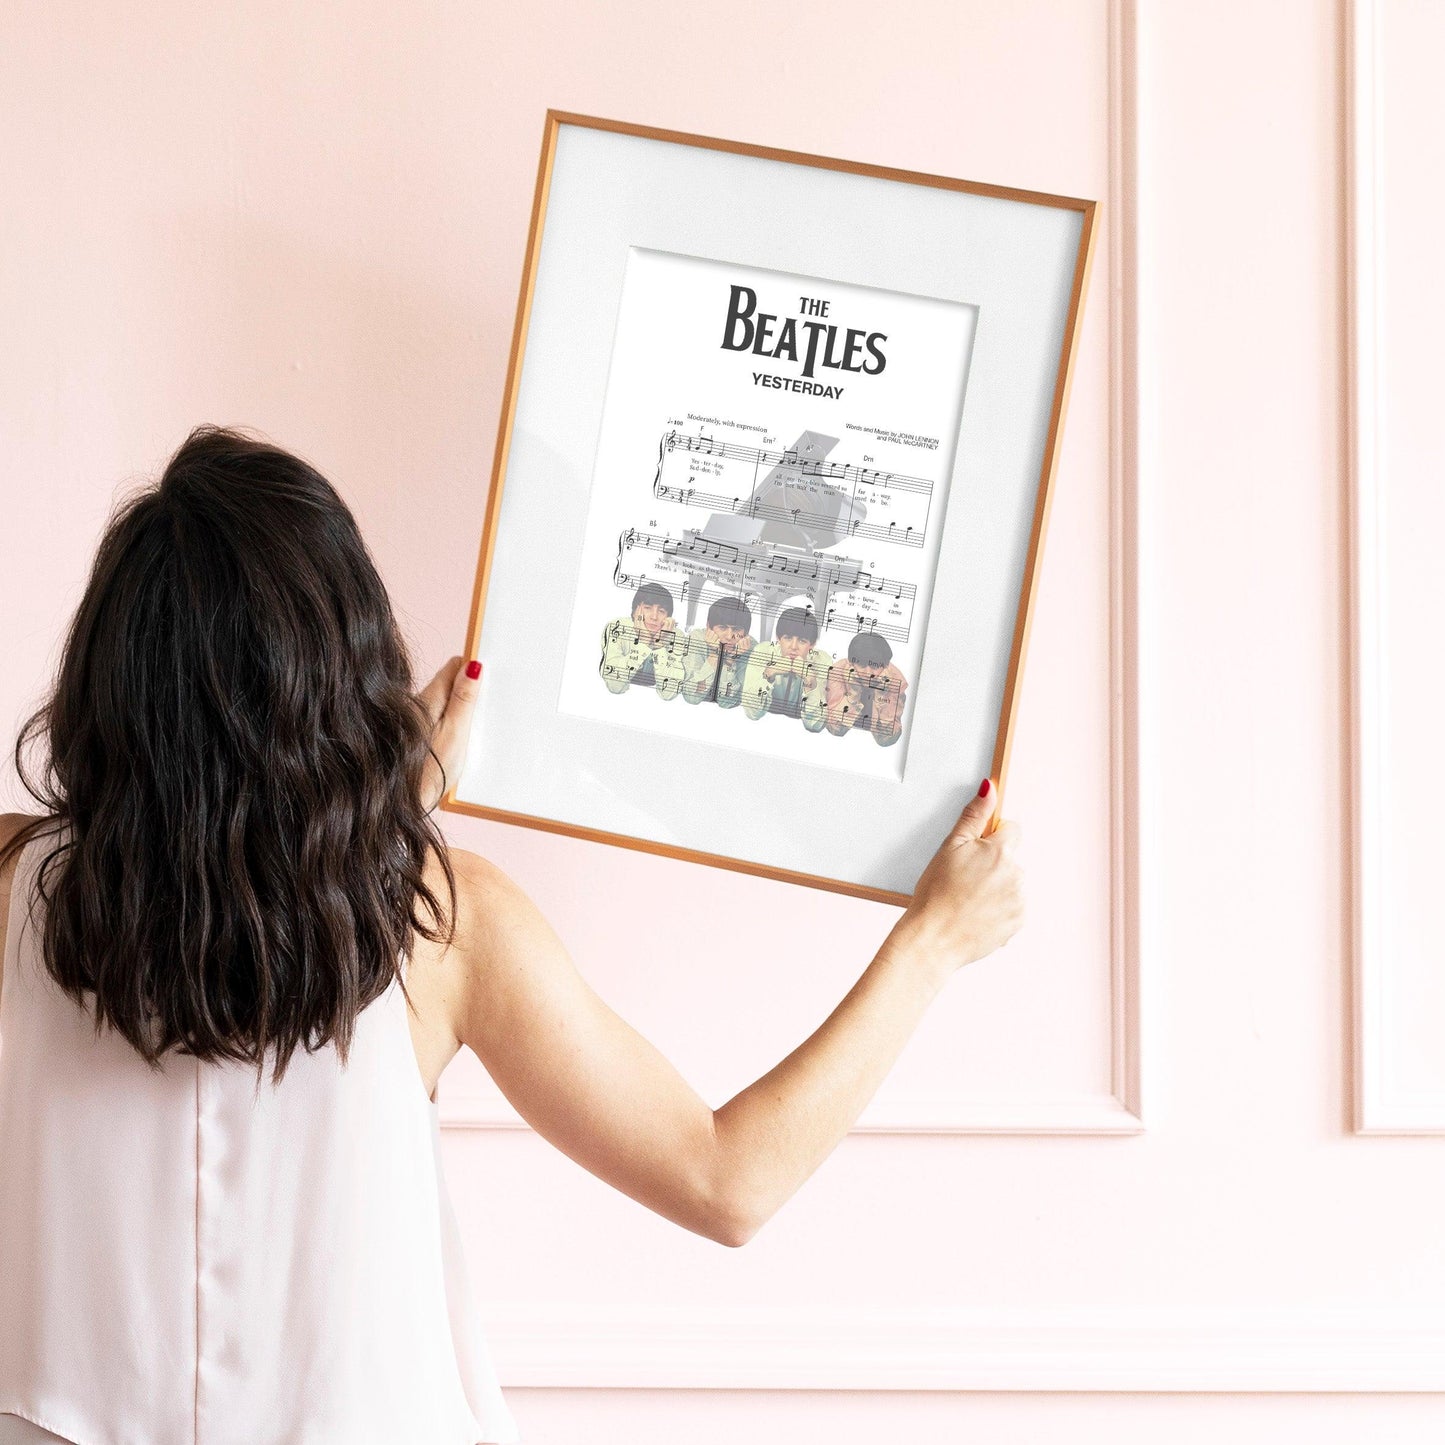 THE BEATLES - Yesterday Theme Song Print | Sheet Music Wall Art | Song Music Sheet Notes Print Everyone has a favorite song and now you can show the score as printed staff. The personal favorite song sheet print shows the song chosen as the score. 